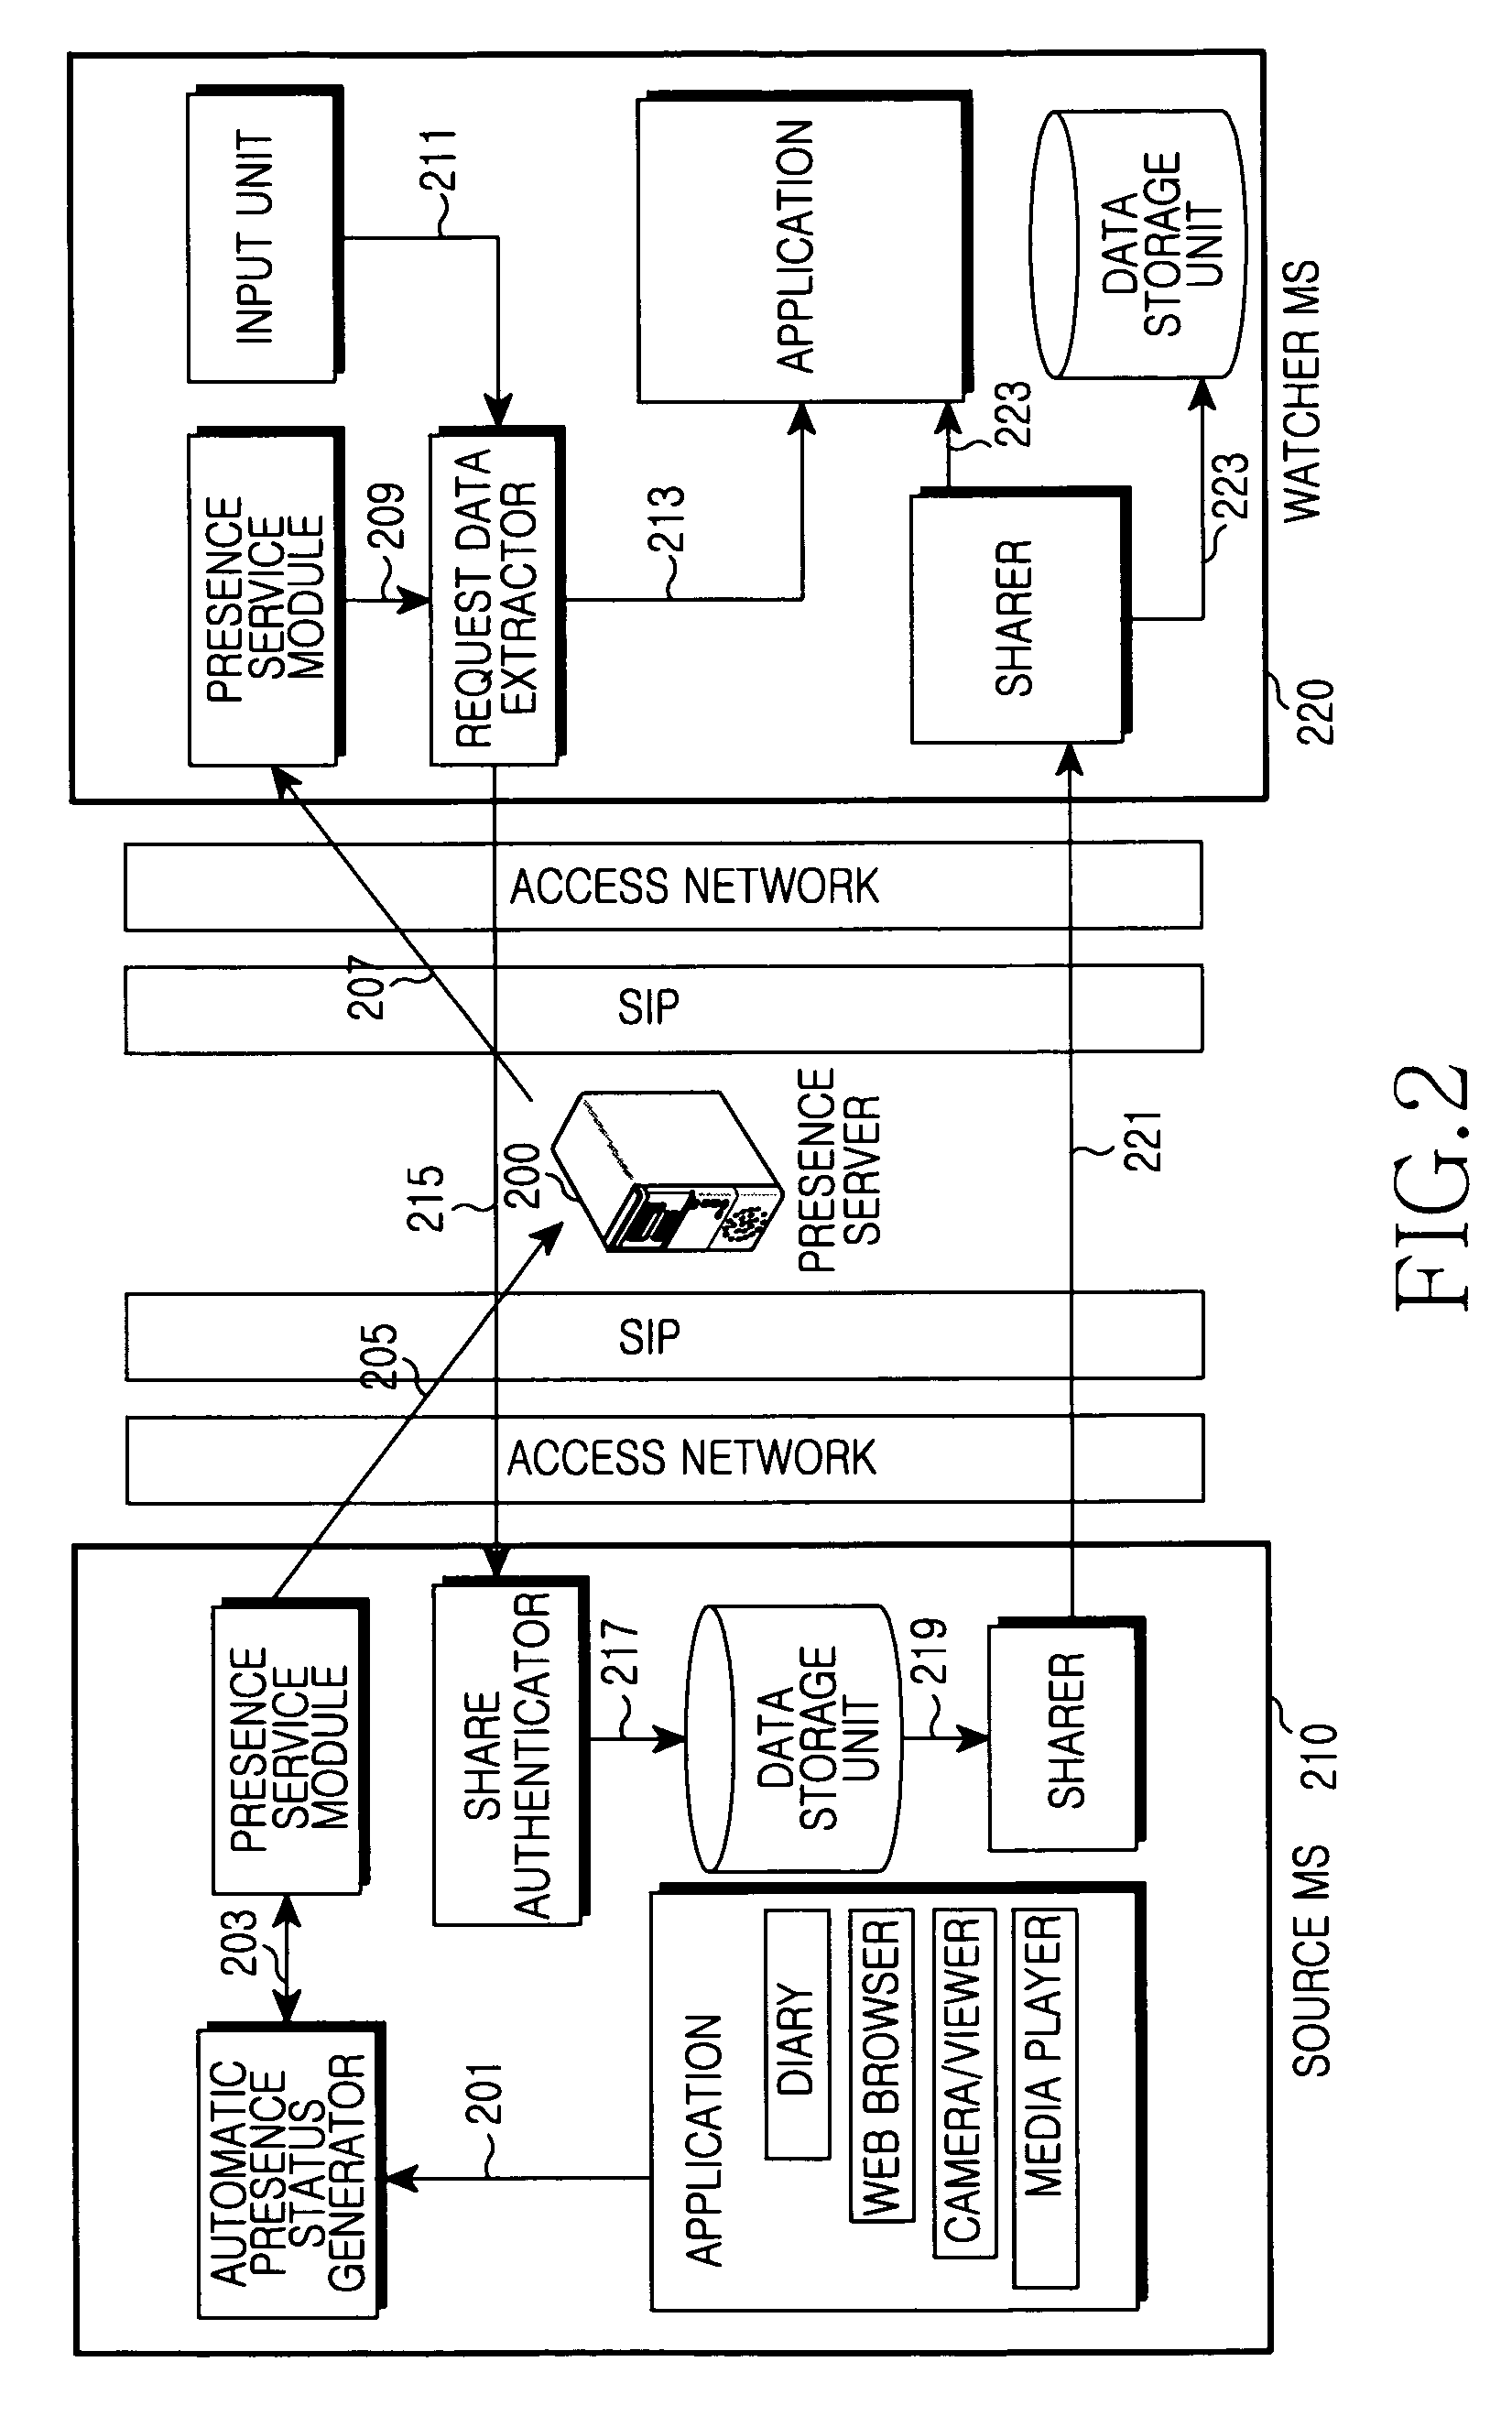 Apparatus and method for sharing information through presence service in a communication network